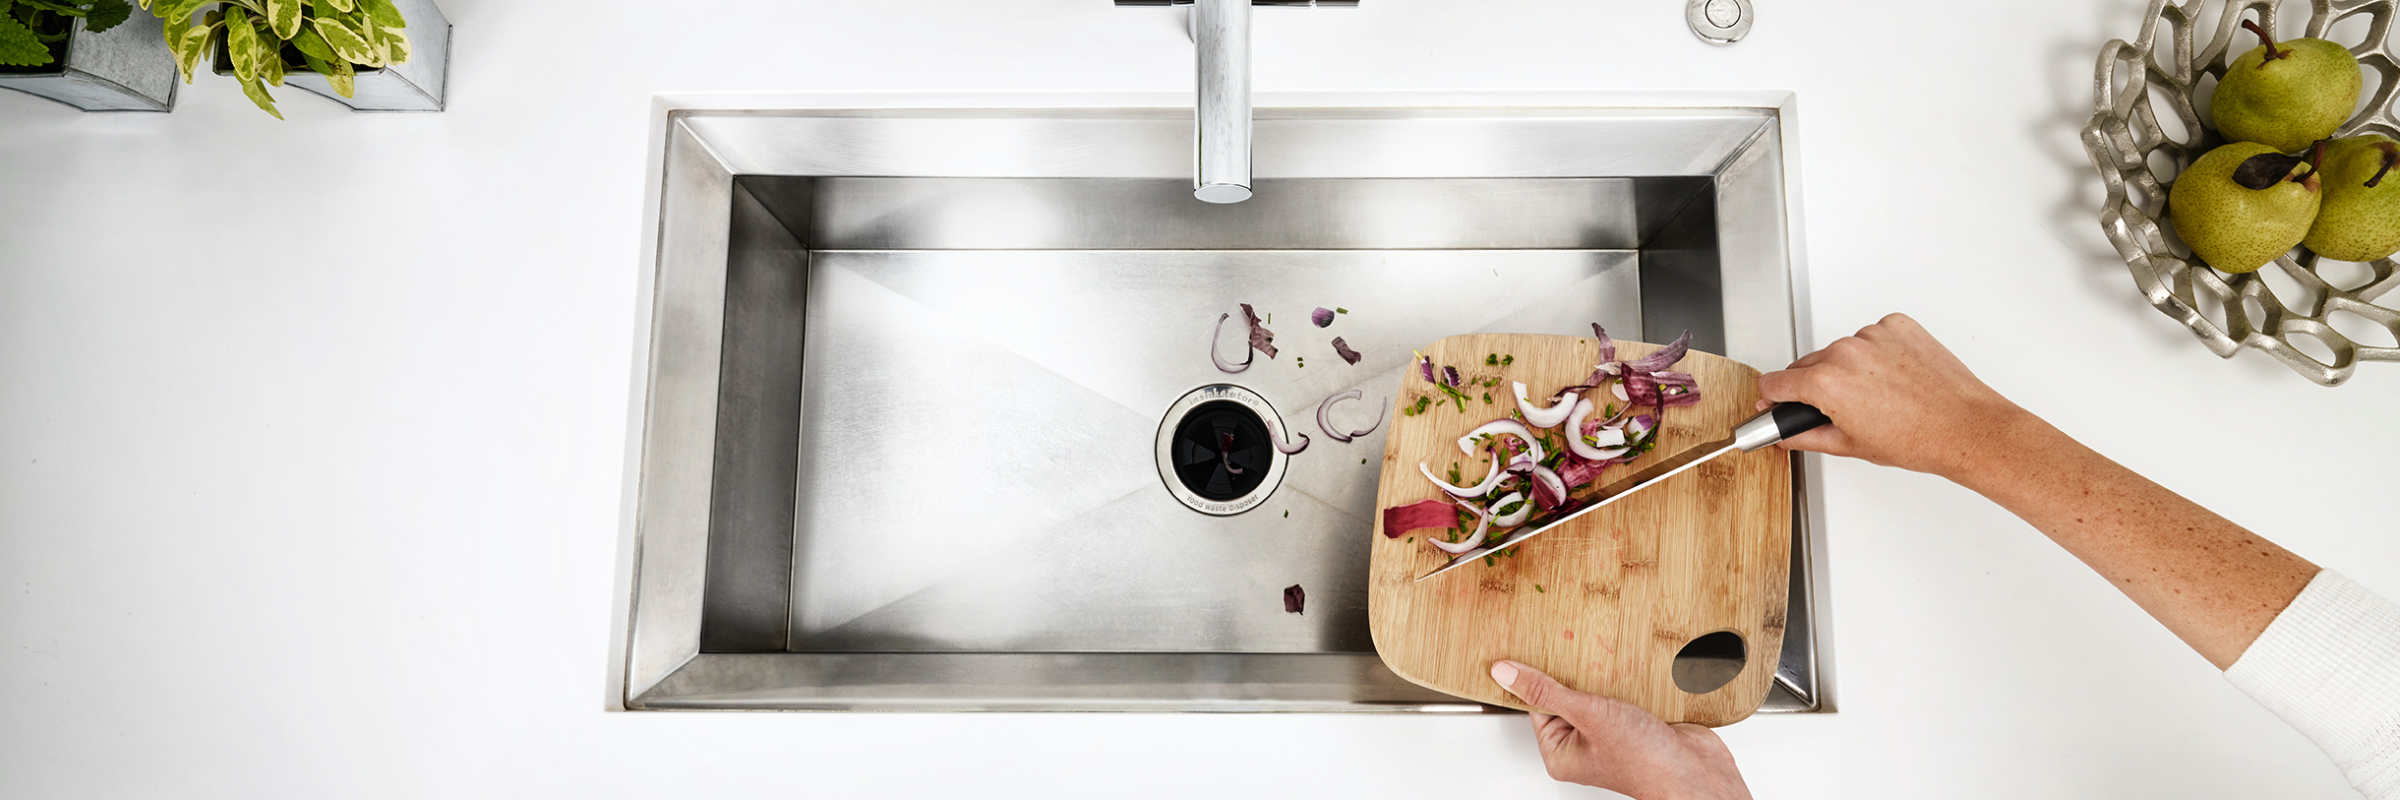 InSinkErator being used with food scraps